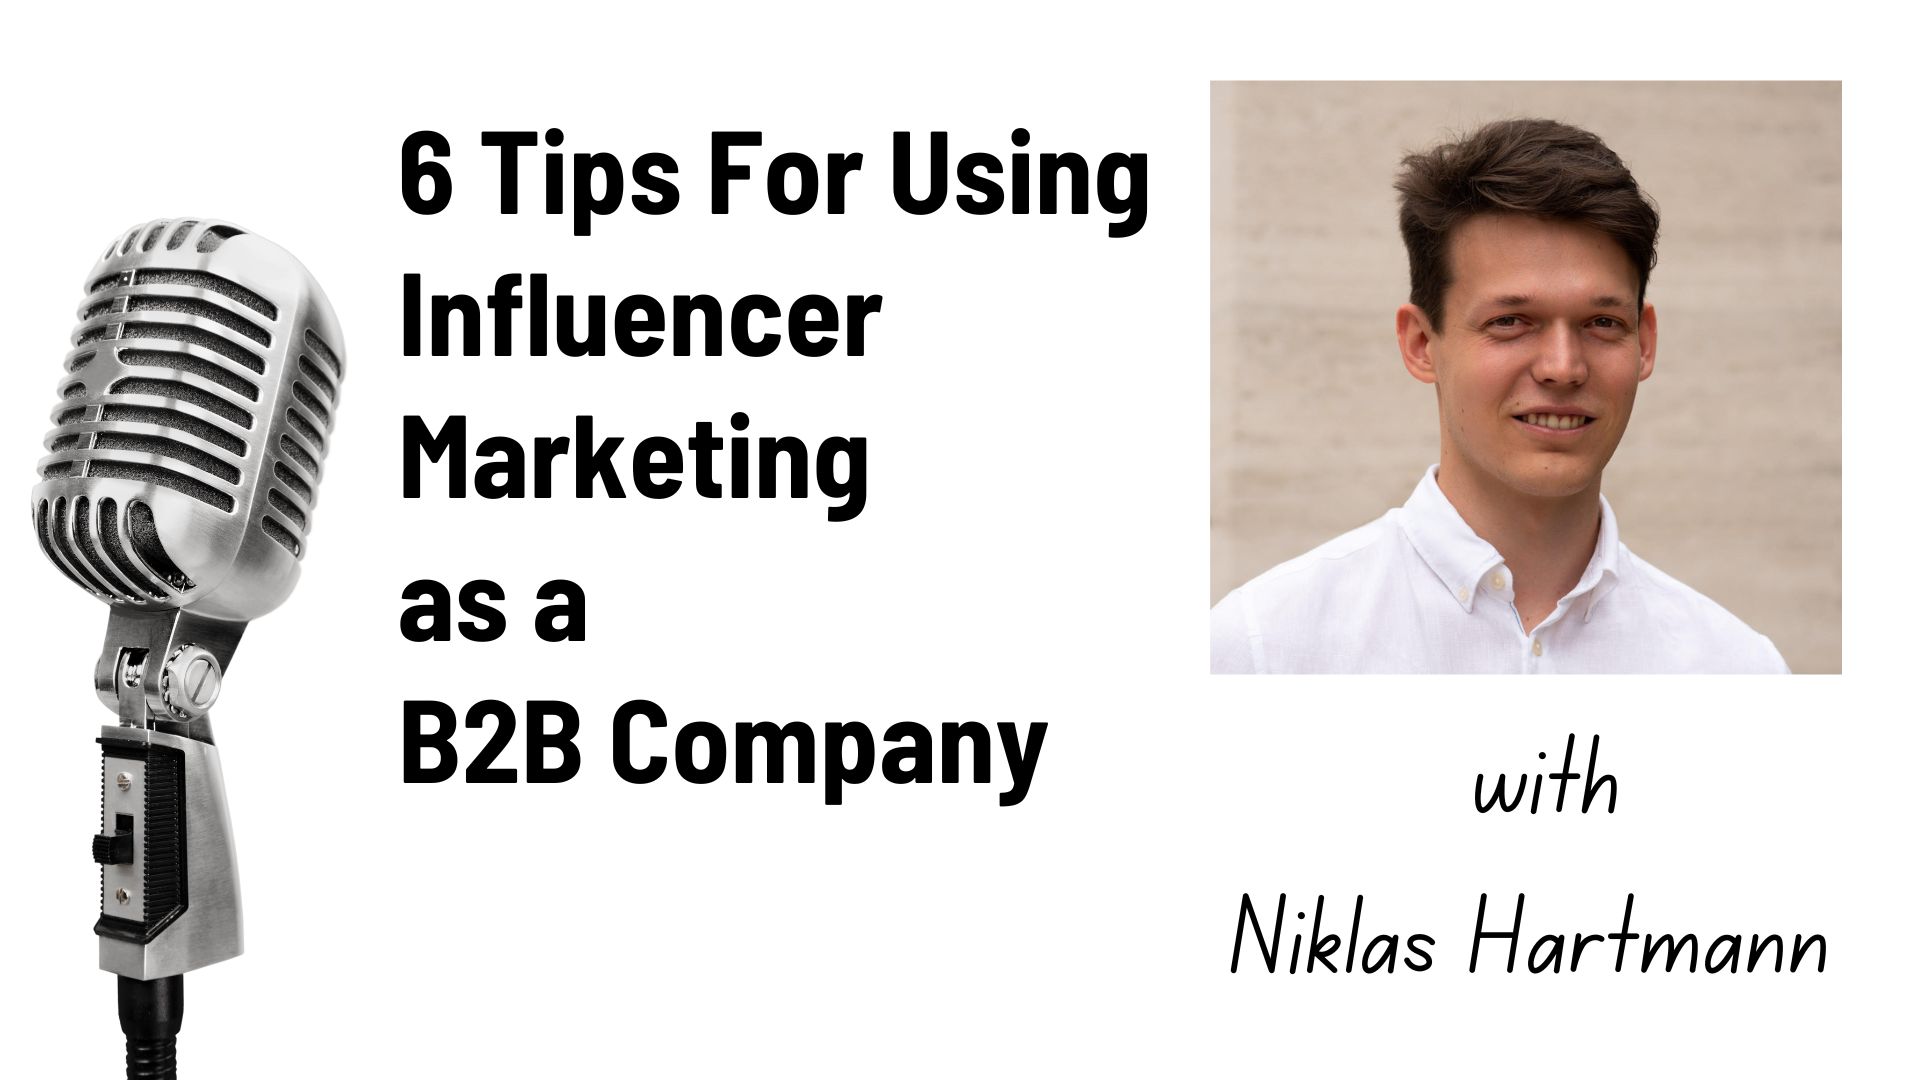 Podcast – 6 Tips for Using Influencer Marketing as a B2B Company